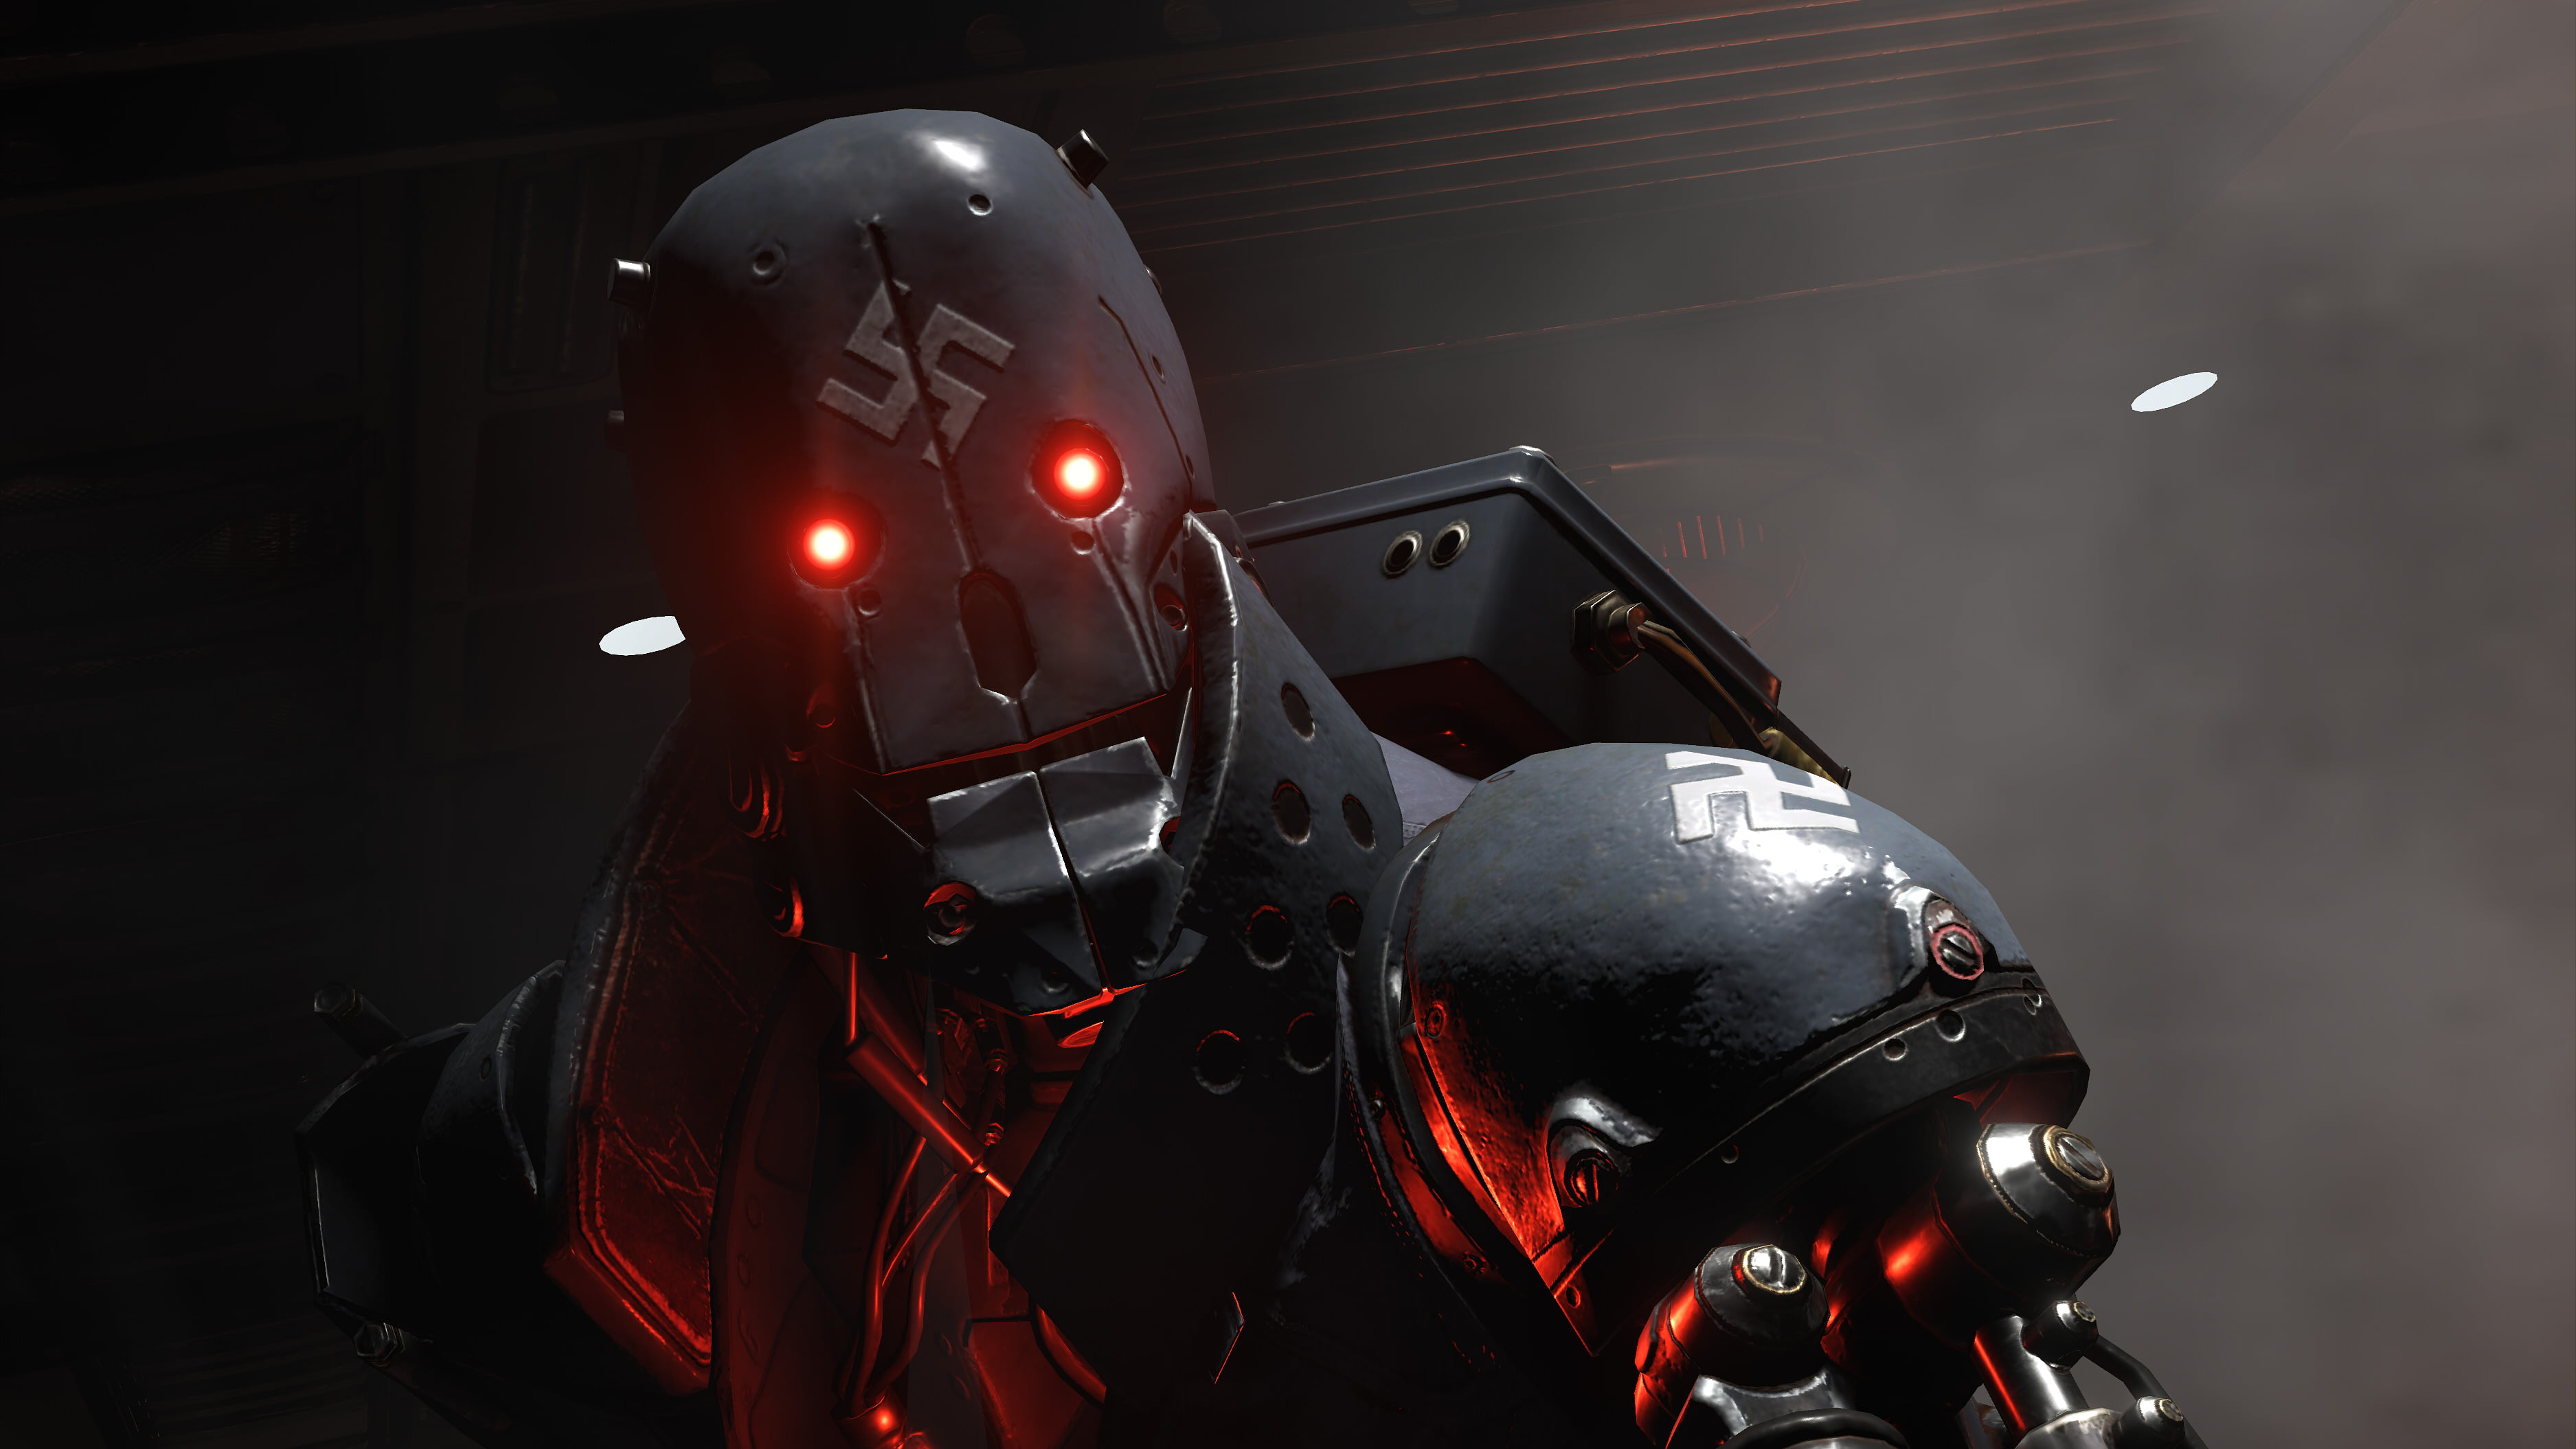 black and red wallpaper,helmet,personal protective equipment,fictional character,headgear,vehicle